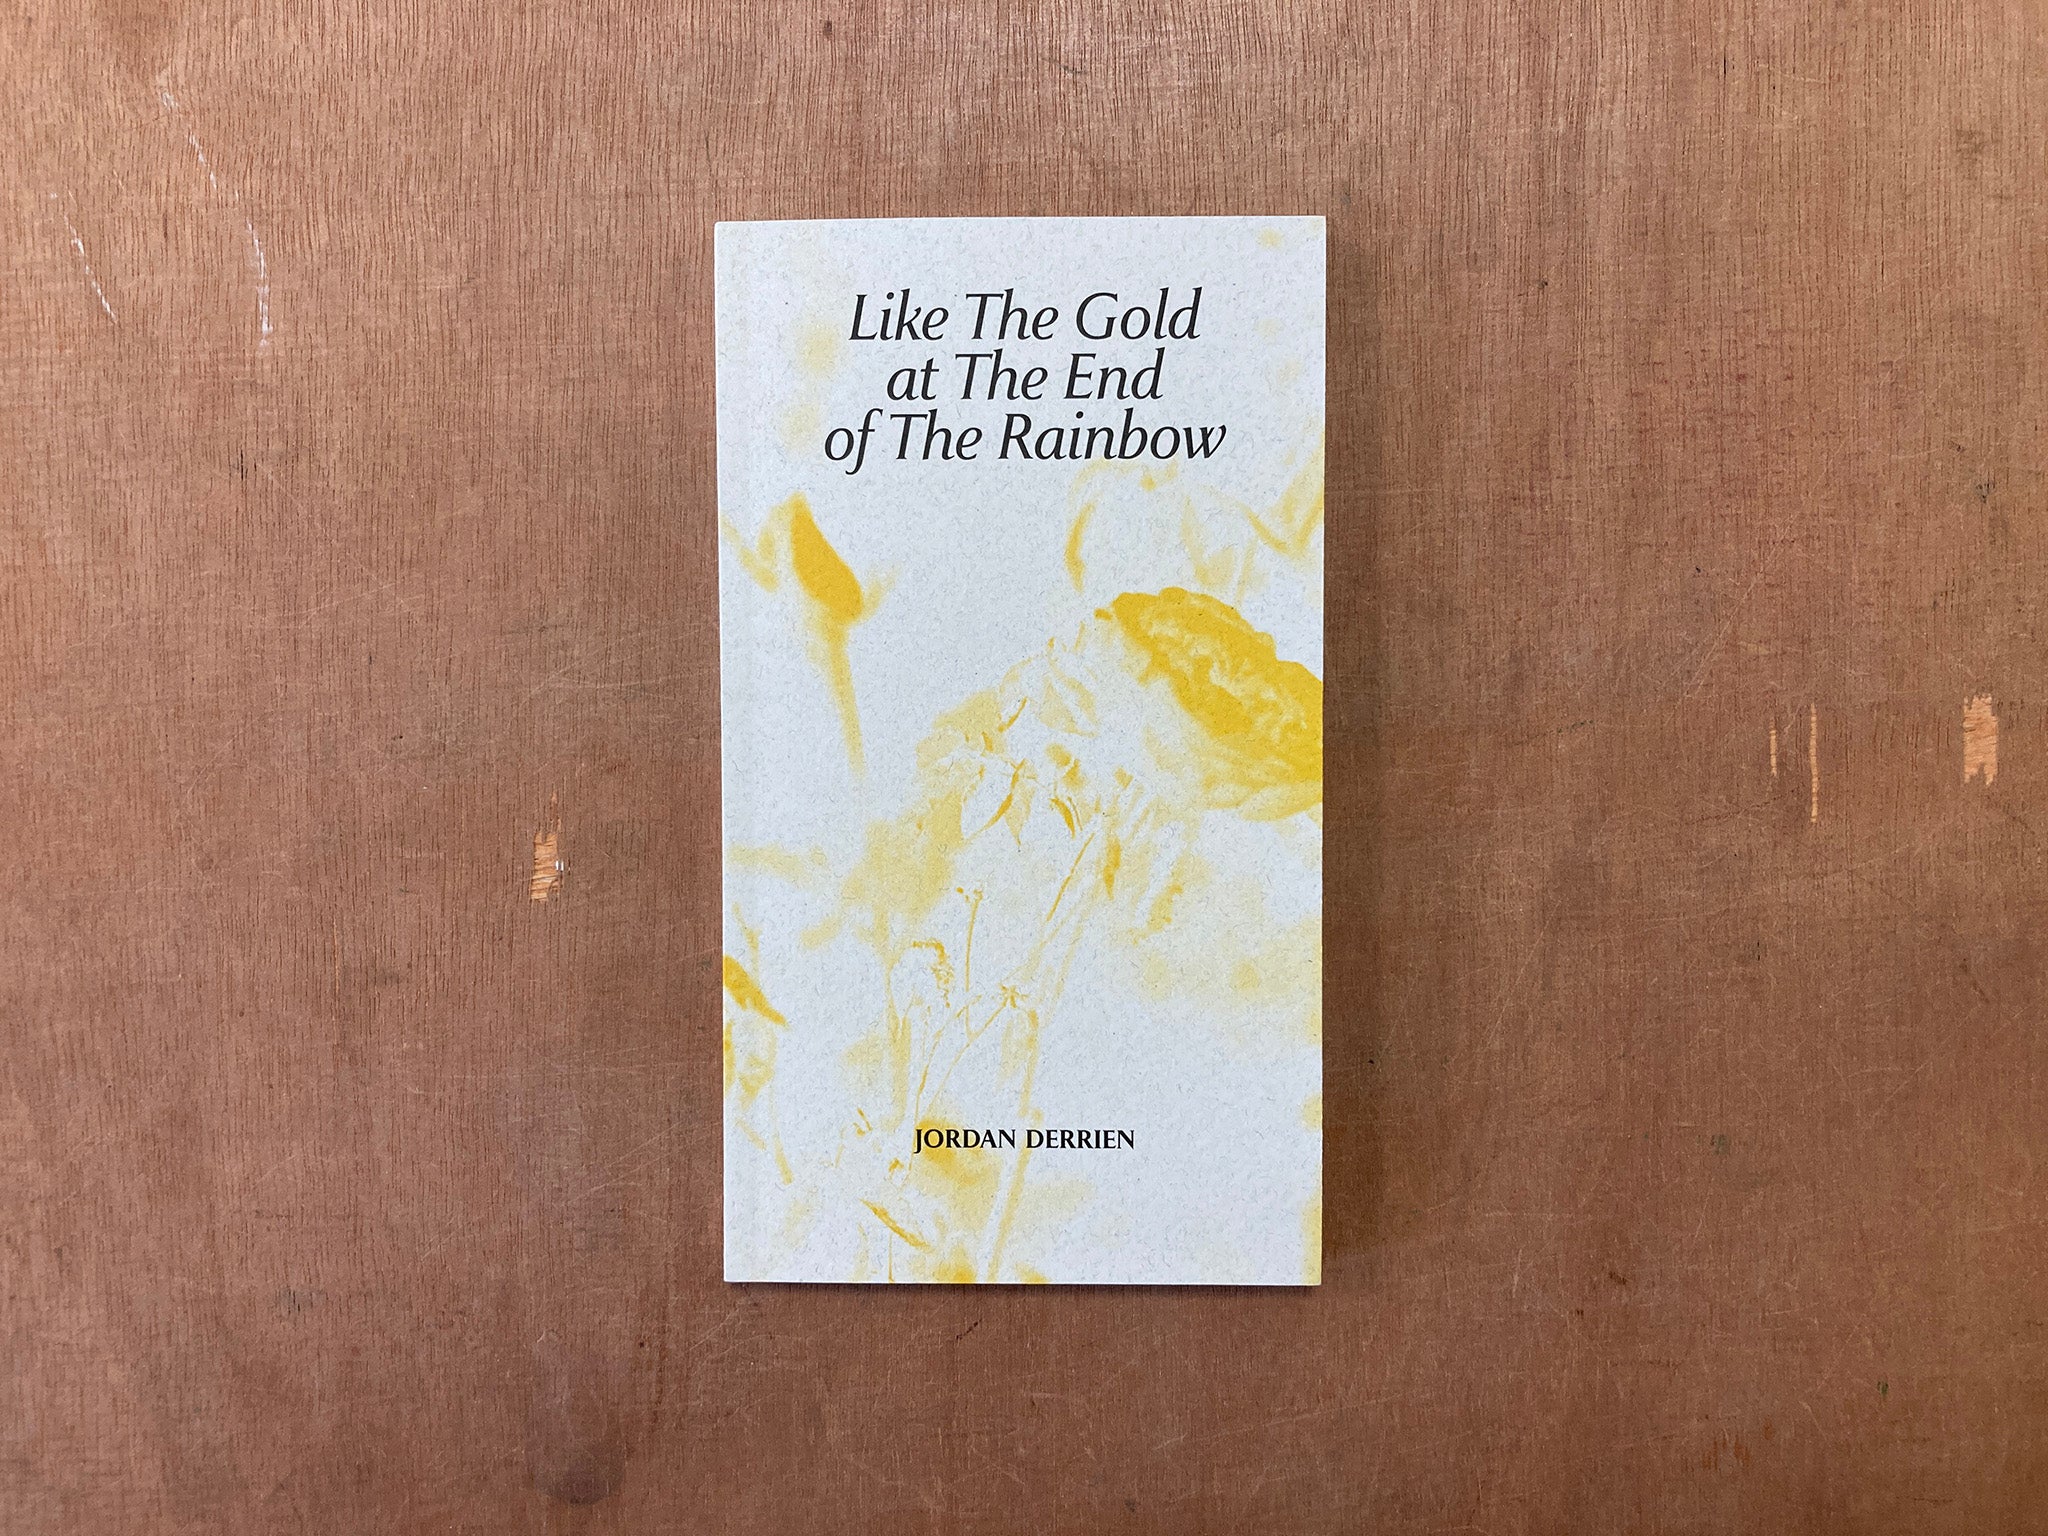 LIKE THE GOLD AT THE END OF THE RAINBOW by Jordan Derrien